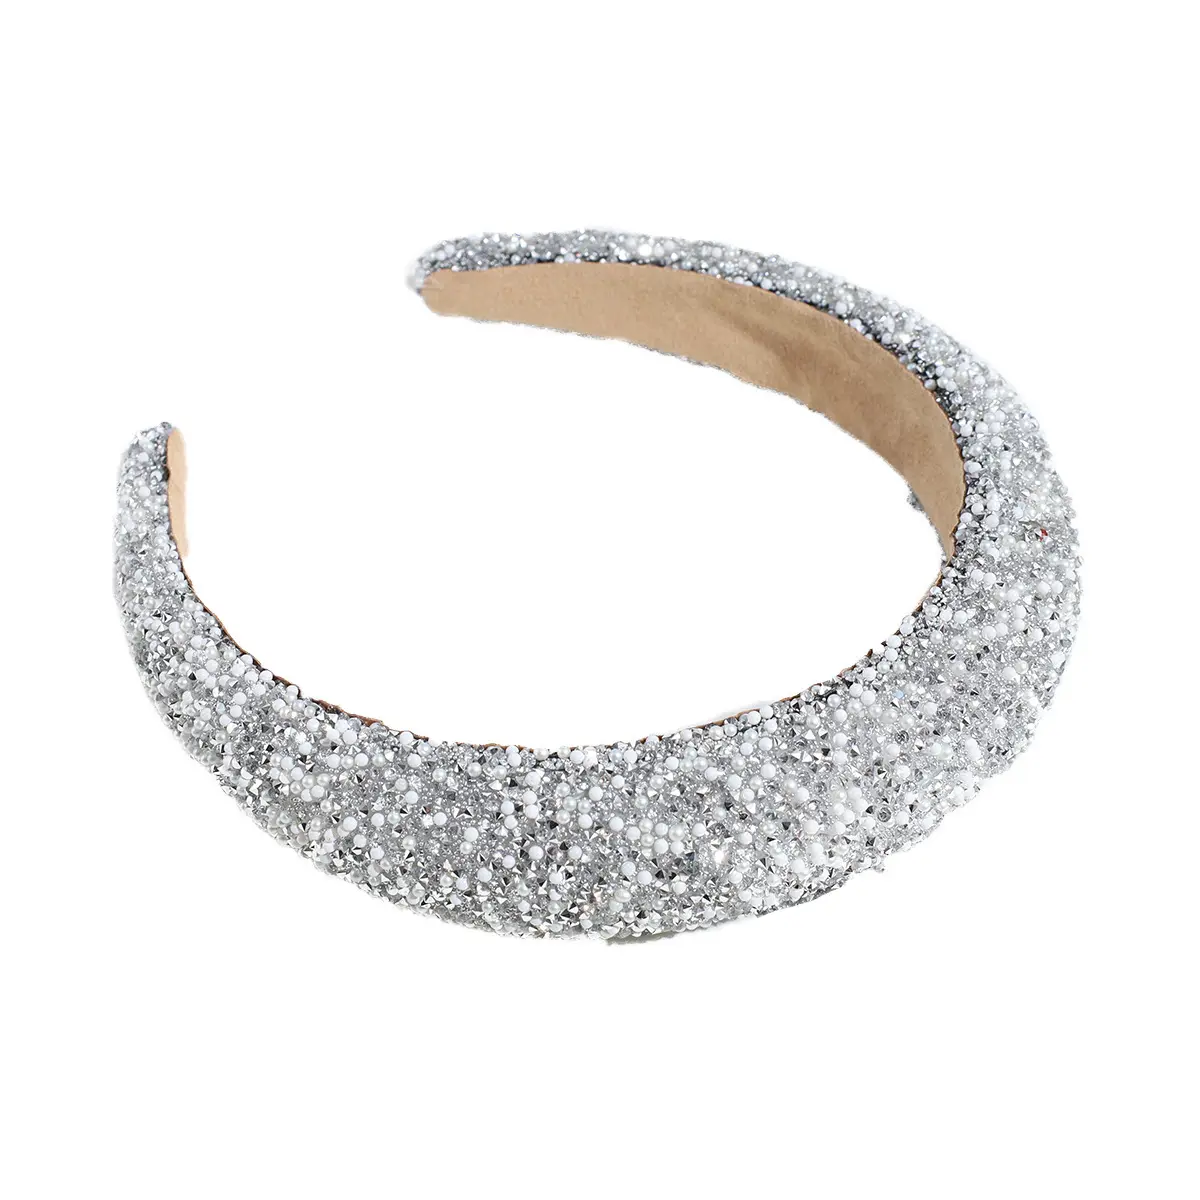 Commercio all'ingrosso donne glitter leather hairband hoop animal feather millinery fascinator hat per ladies party